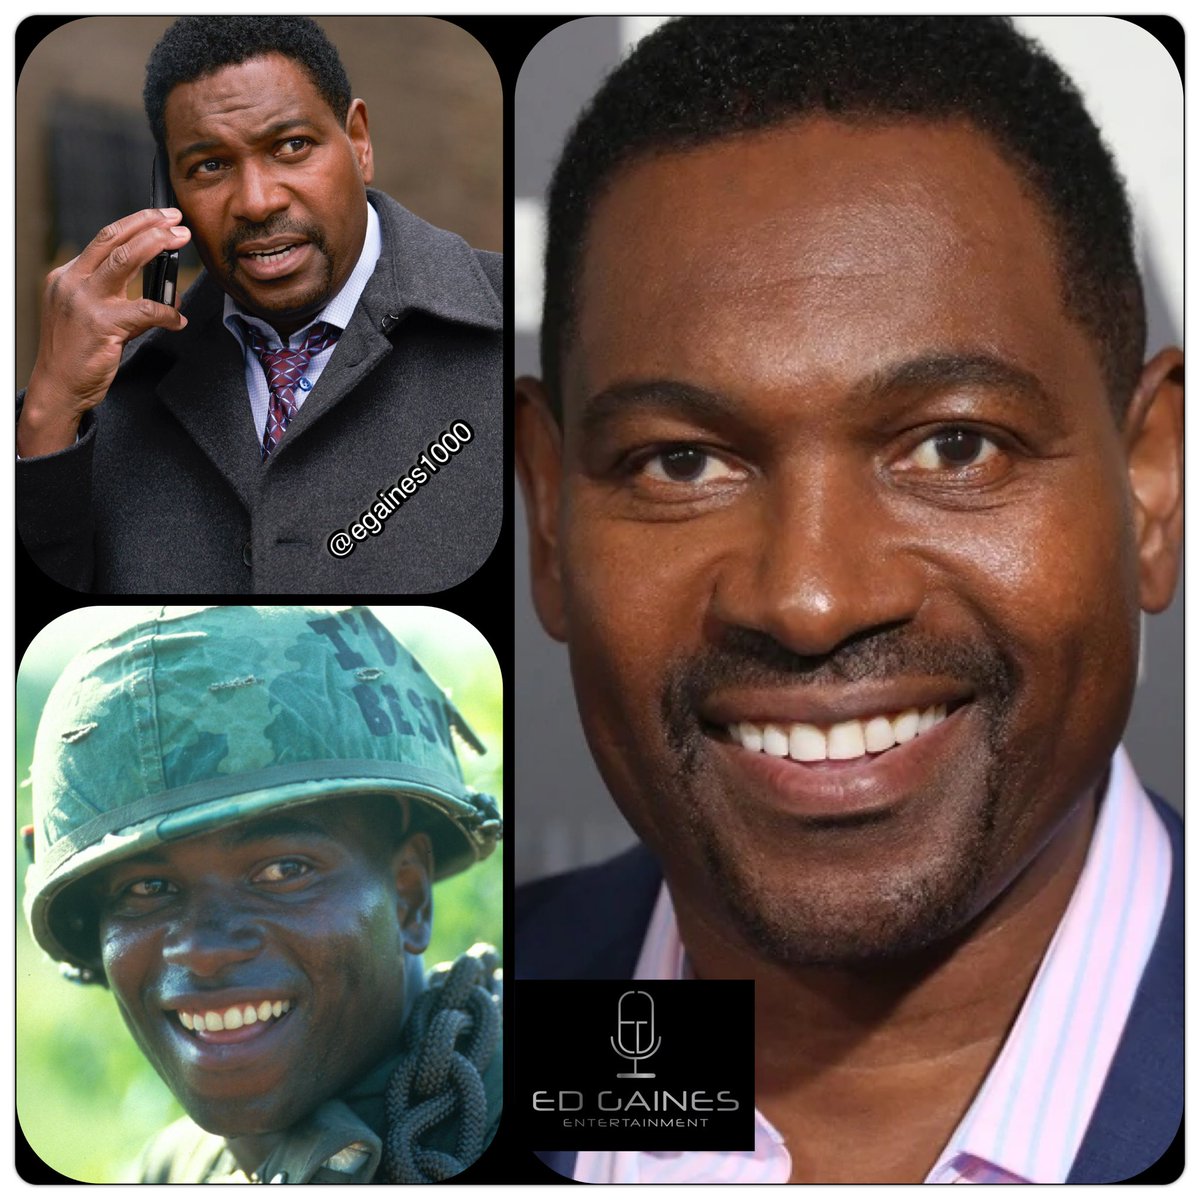 🎂🎈🎂🎈🎂
Happy Birthday #MykeltiWilliamson! He Is 65Today! #ForrestGump #ConAir #Justified #Boomtown #Fences #Atl @mykeltiwmson